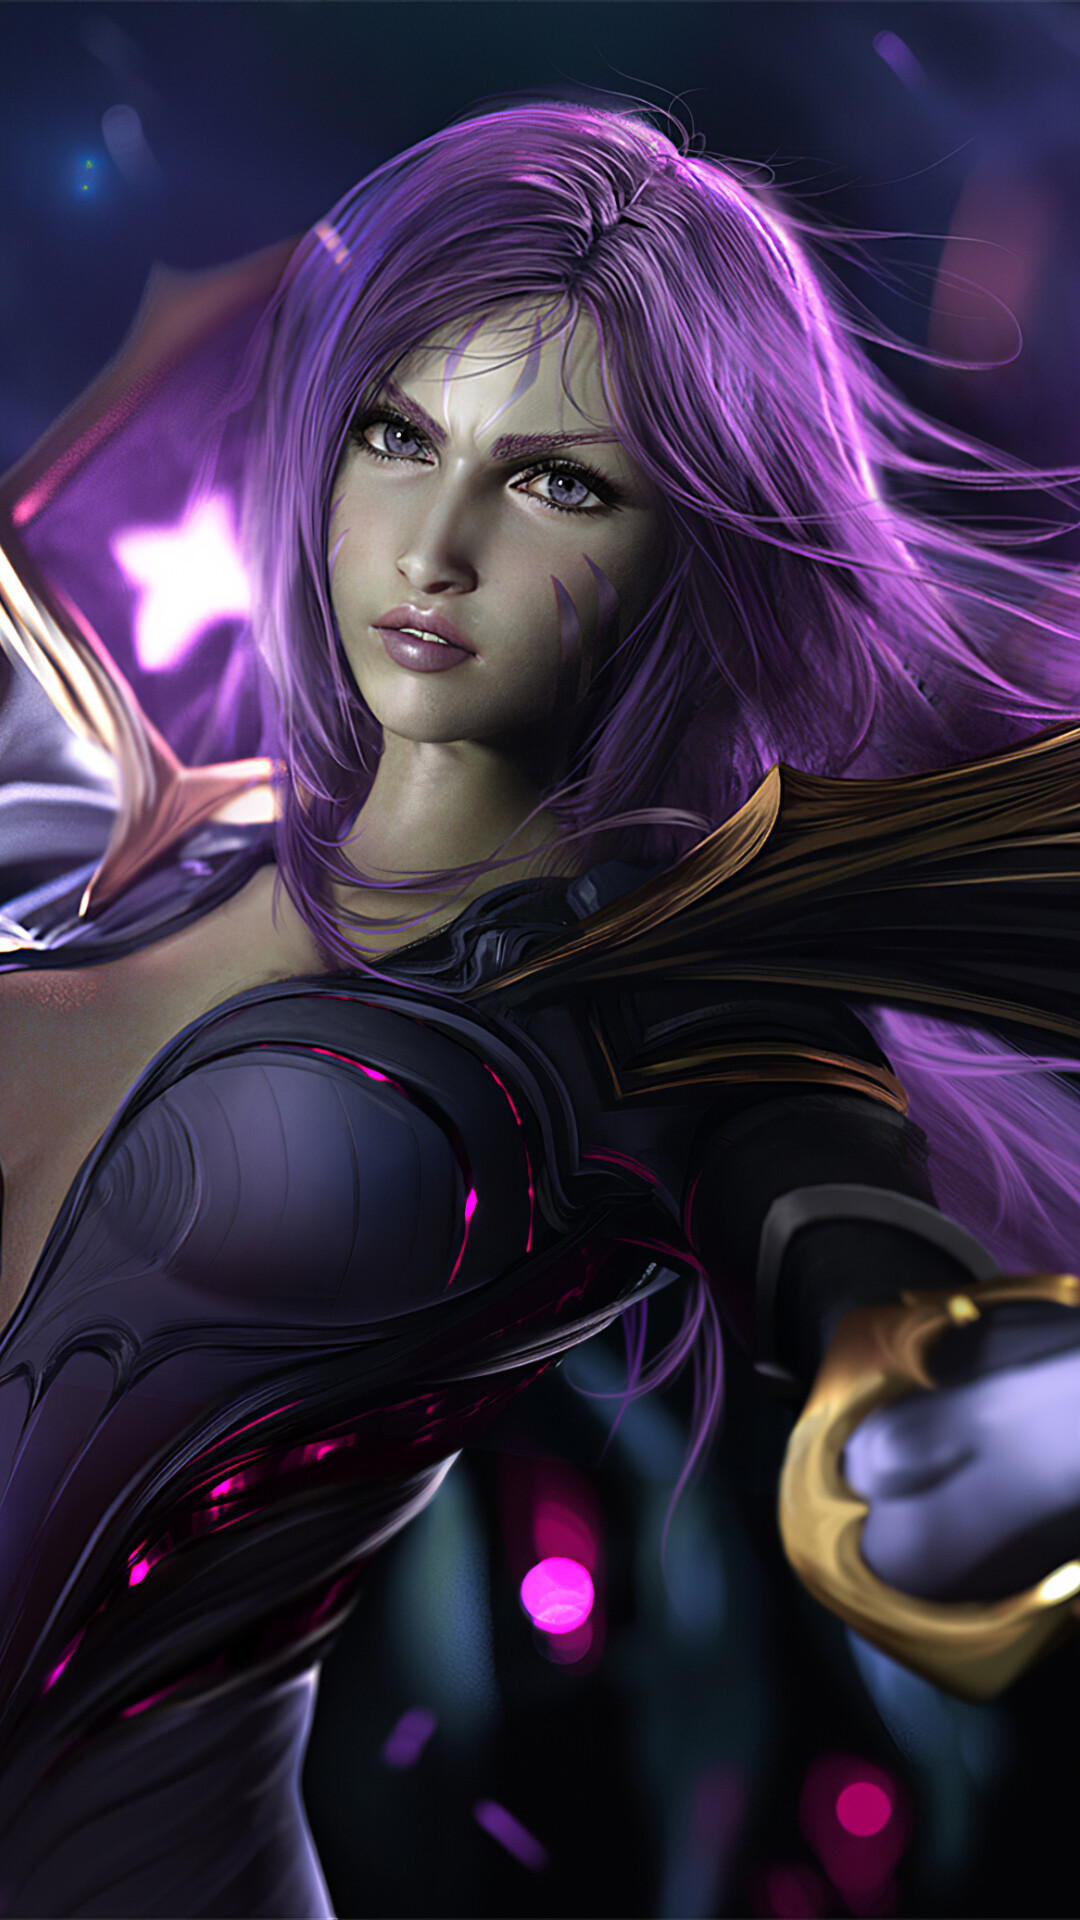 League of Legends: Kai'Sa, Daughter of the Void, A Marksman and Assassin class. 1080x1920 Full HD Background.